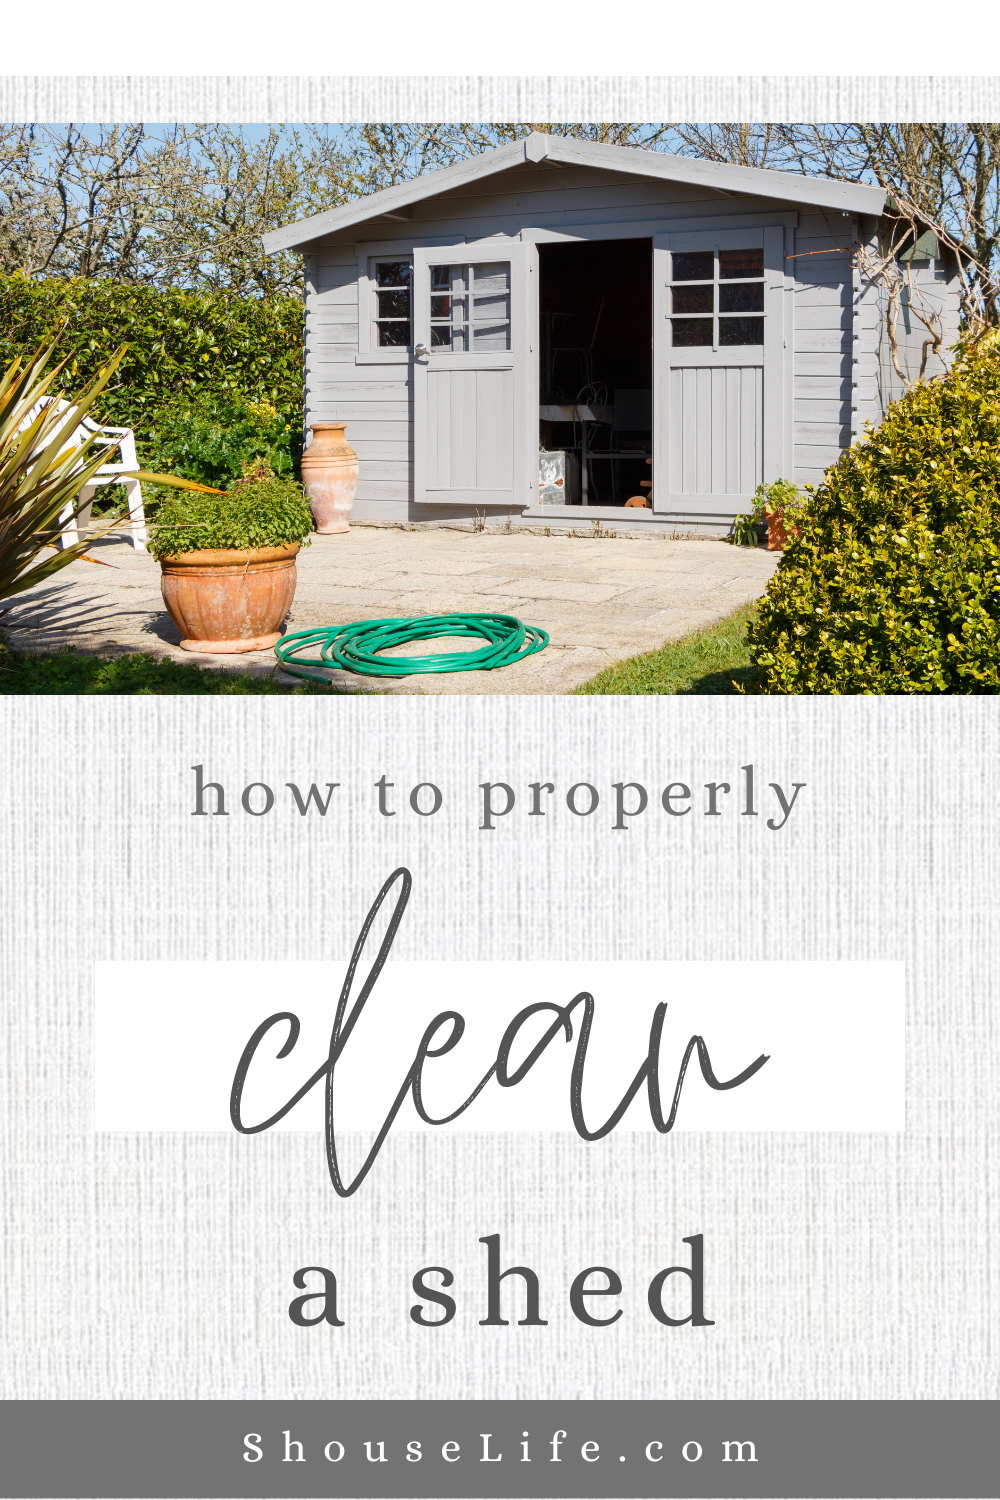 How To Properly Clean A Shed